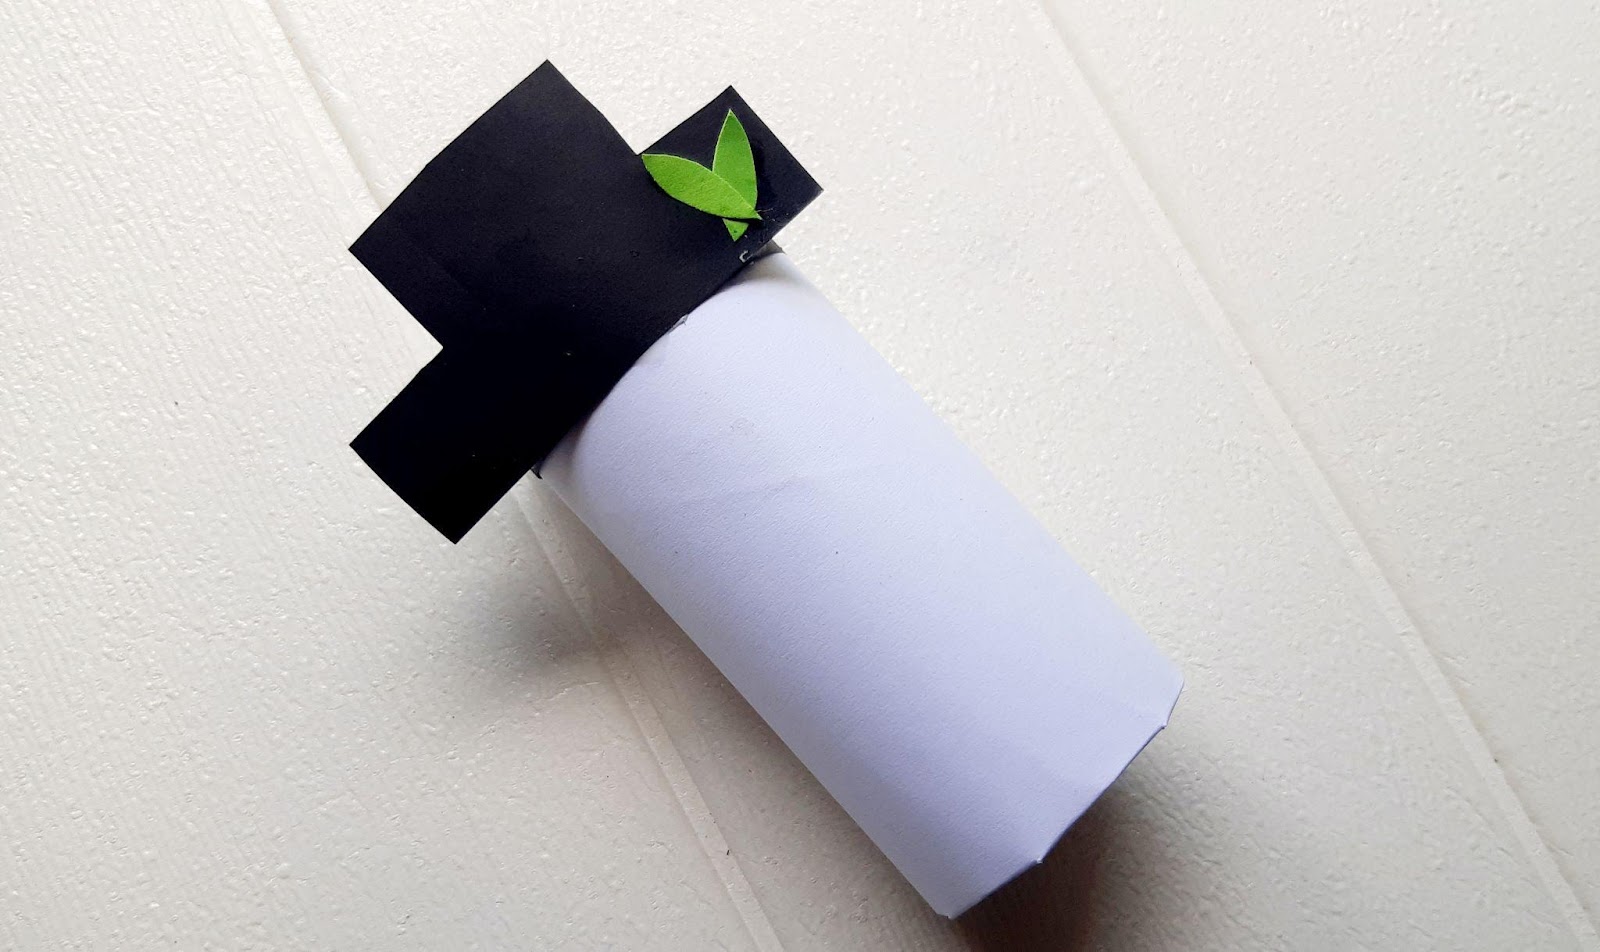 hat glued to toilet paper roll